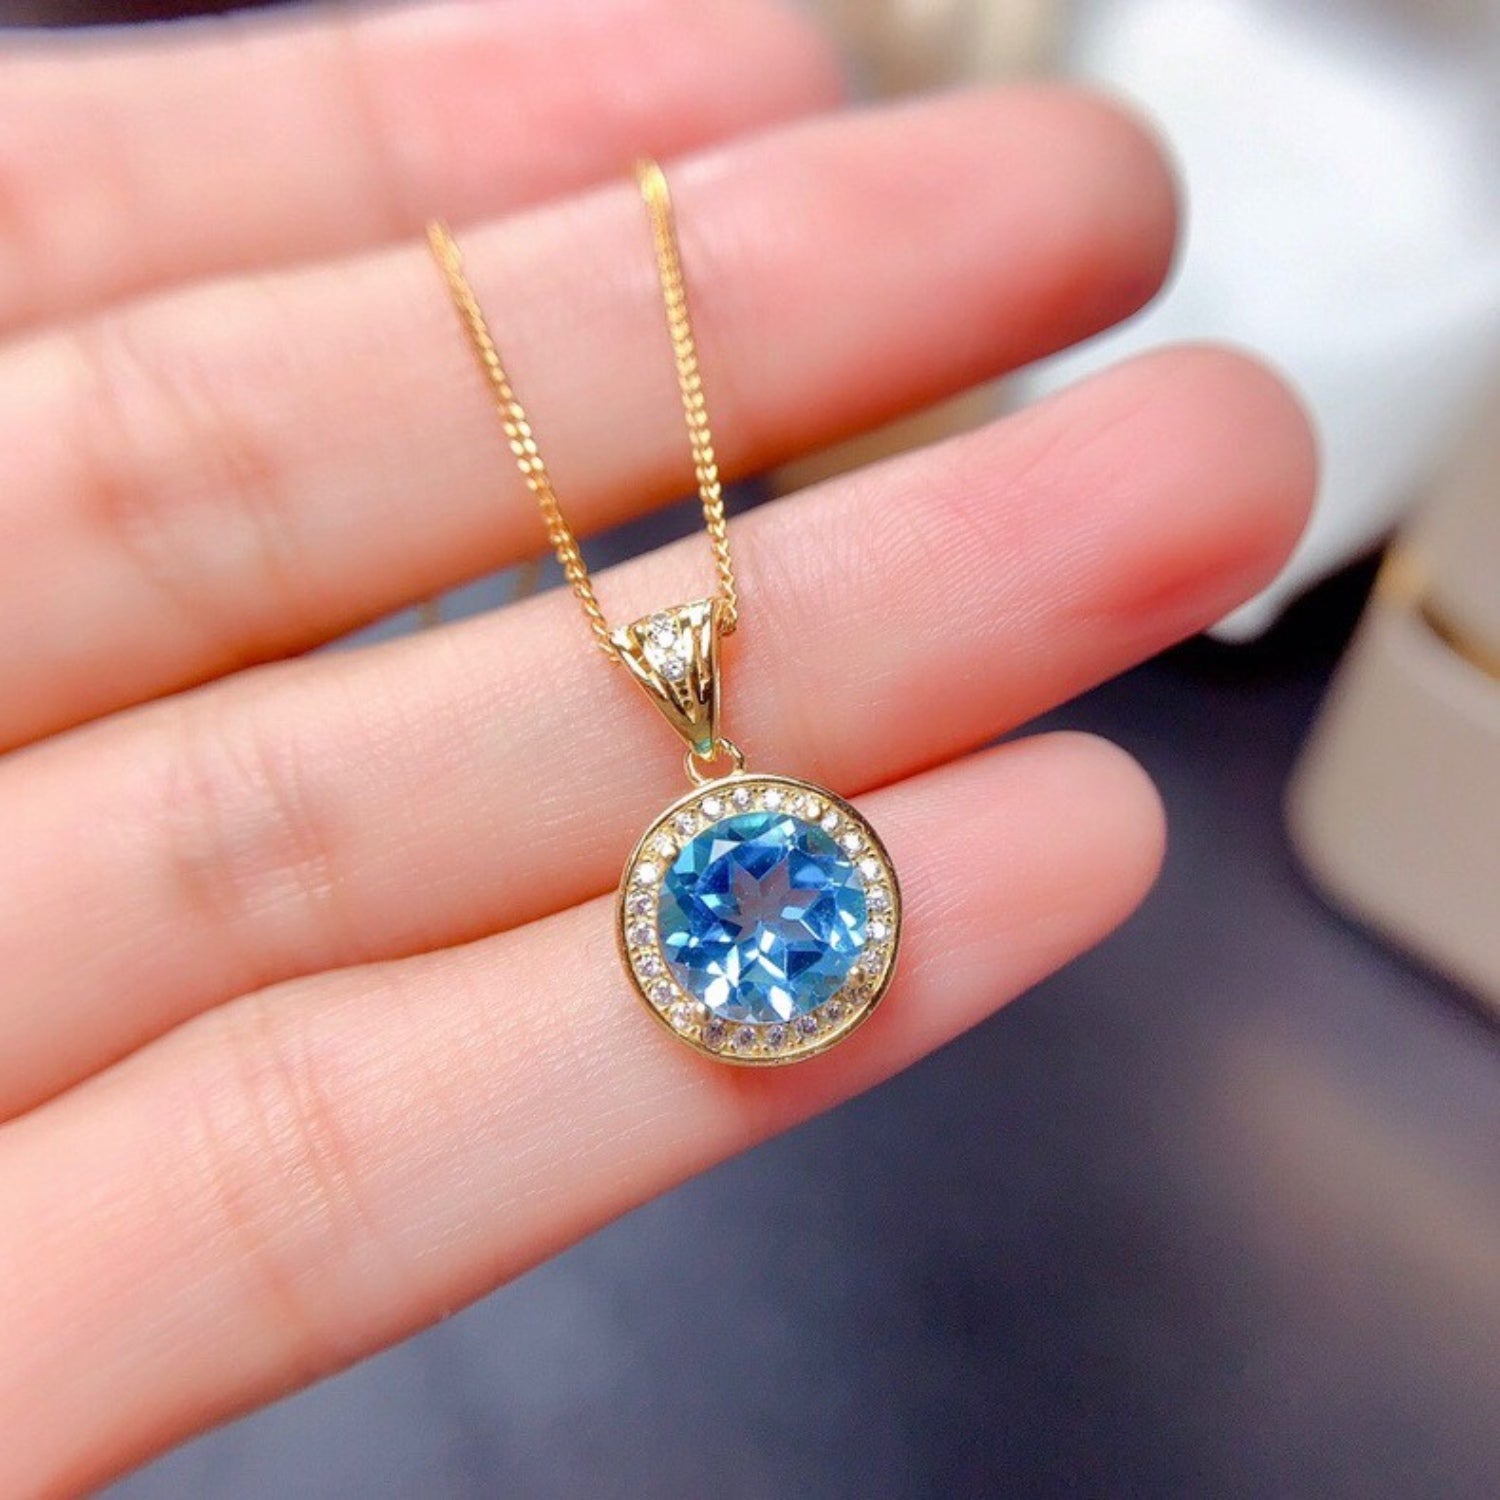 18K Gold-Plated Artificial Gemstone Pendant Necklace - Sydney So Sweet